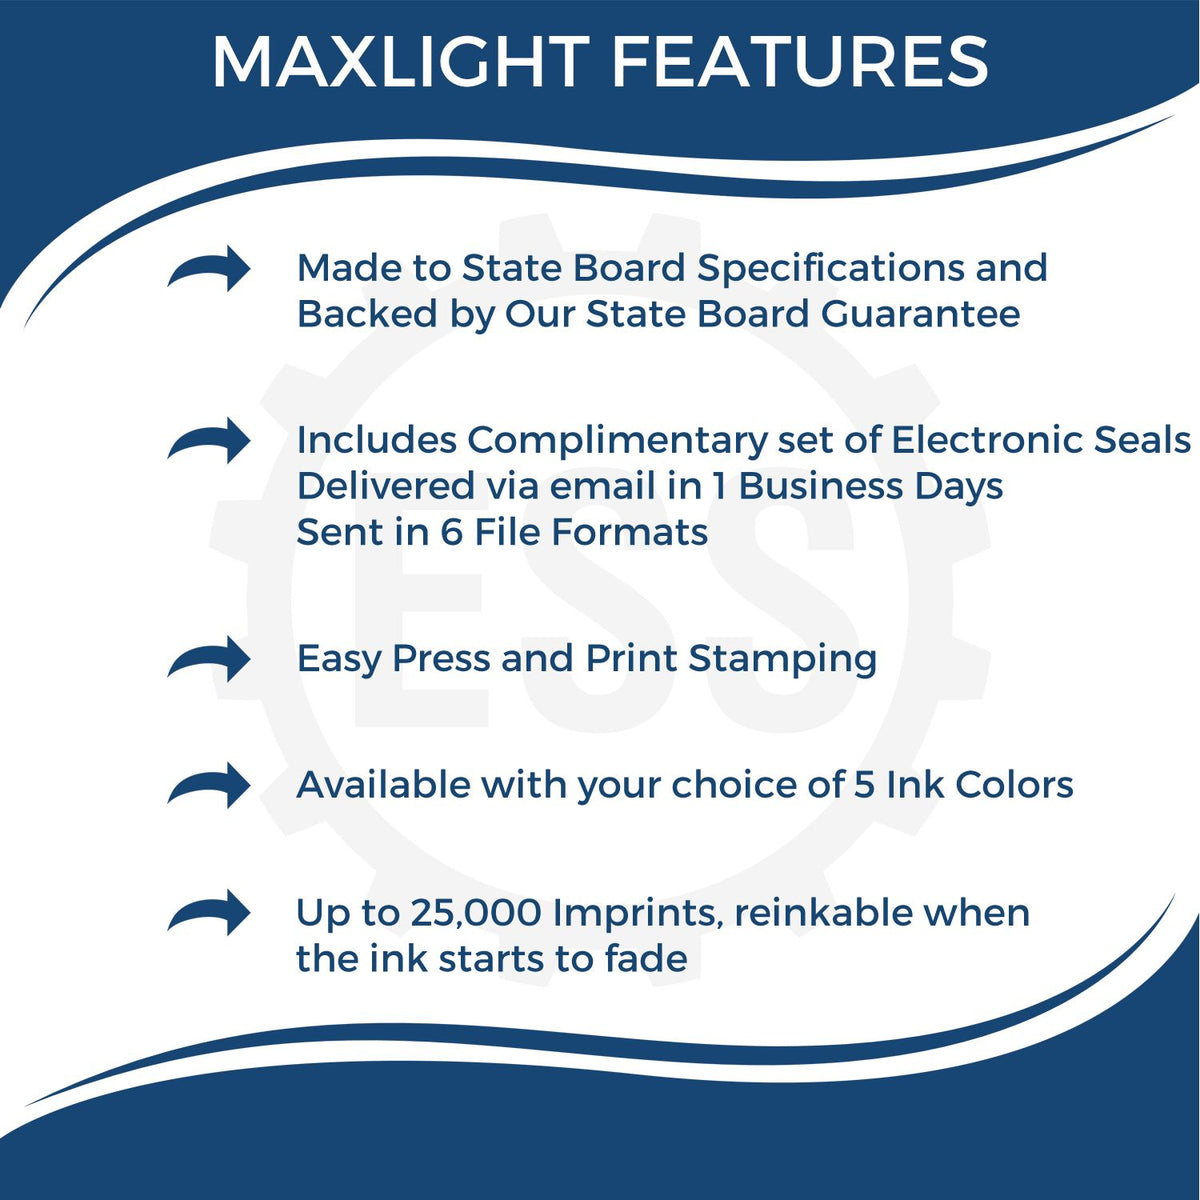 A picture of an infographic highlighting the selling points for the Premium MaxLight Pre-Inked Maryland Geology Stamp